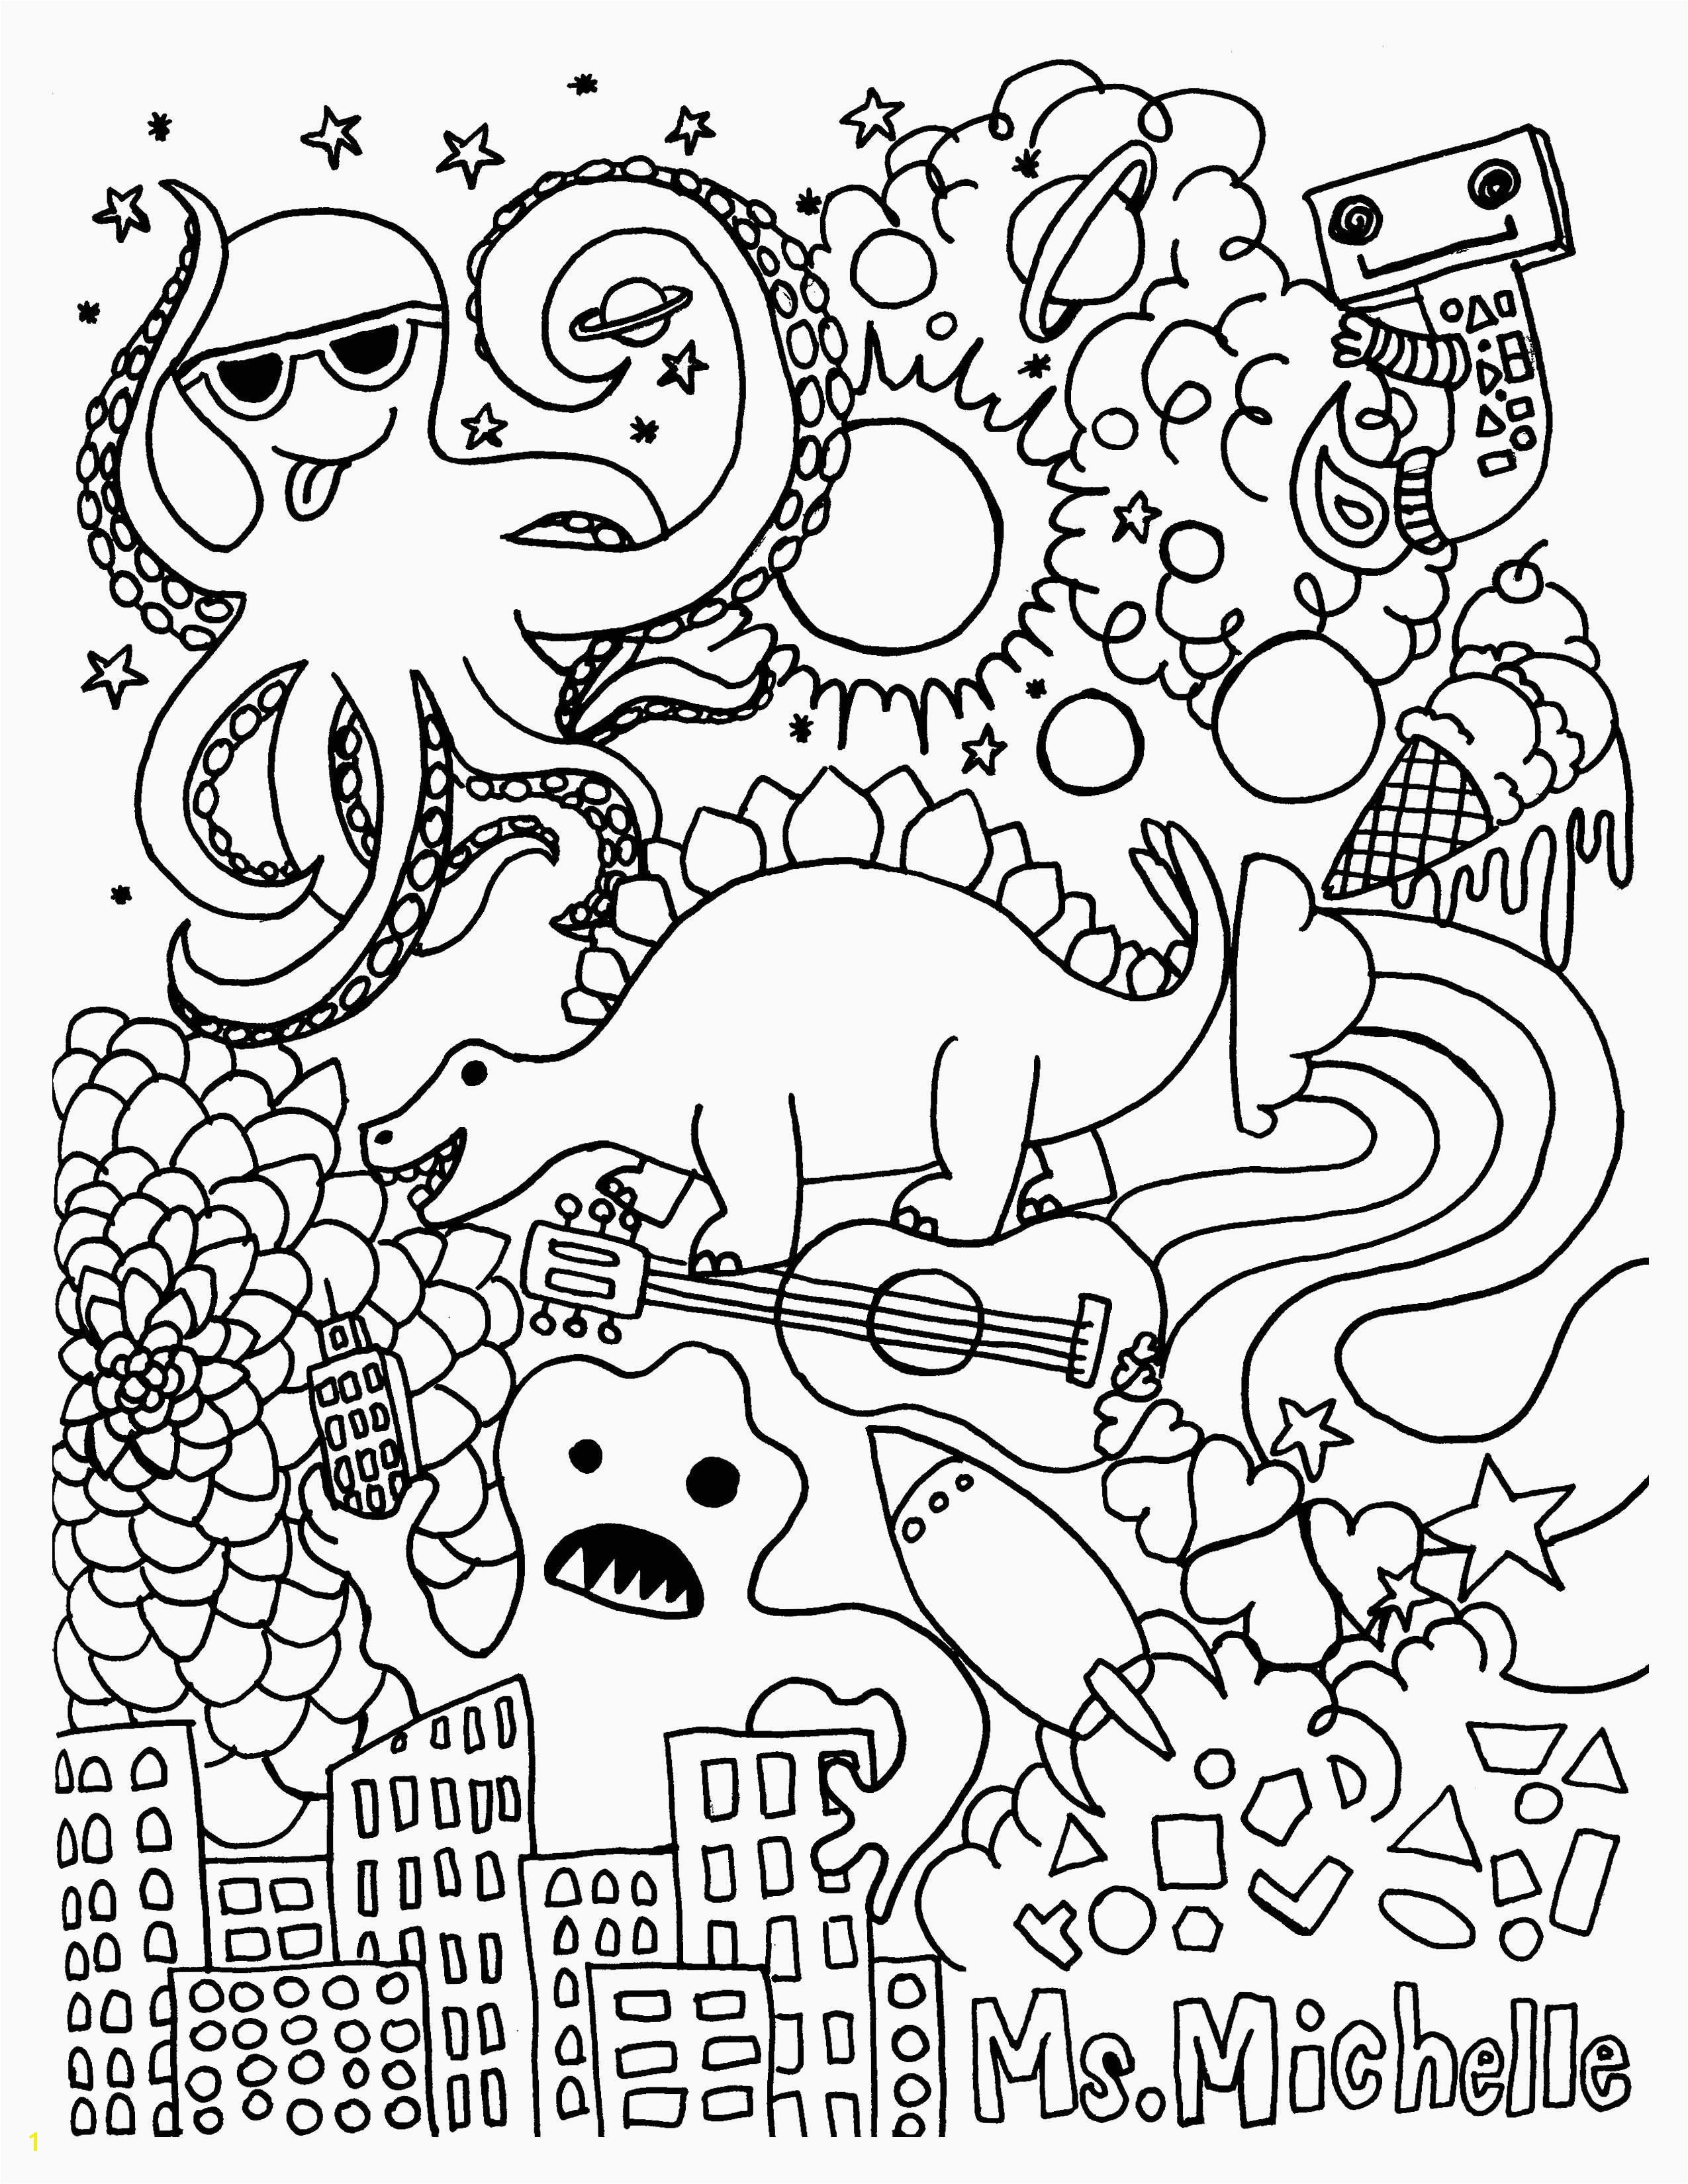 Princess Coloring Pages Free Mermaid Coloring Pages Sample thephotosync